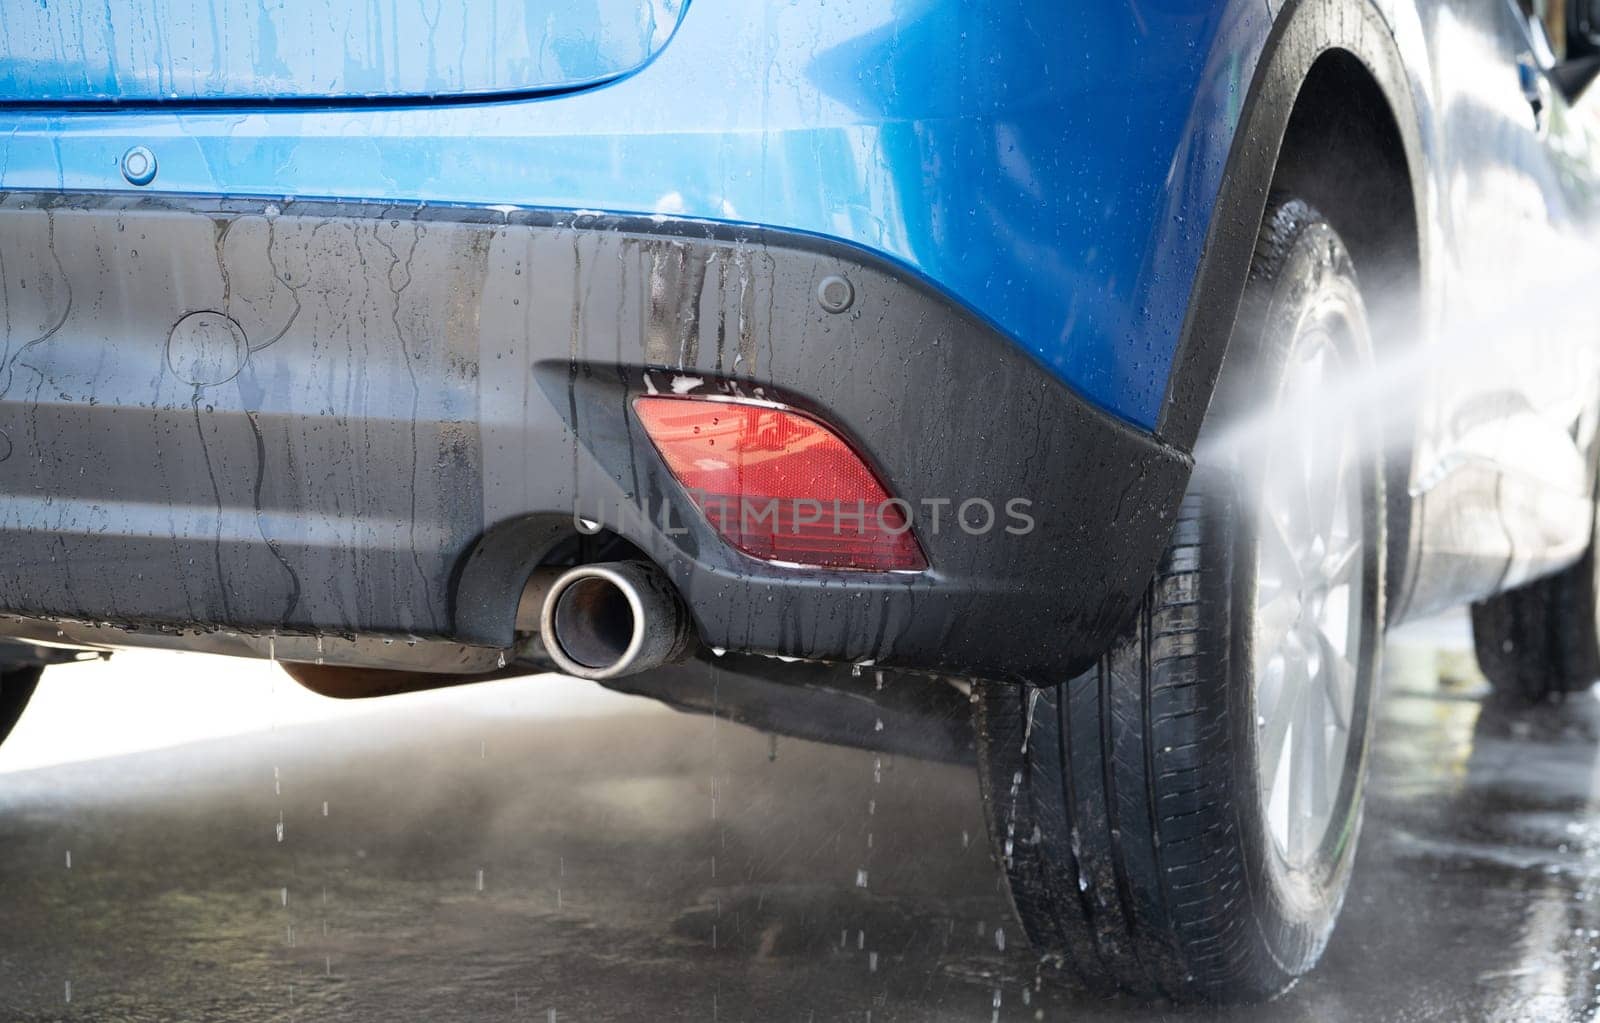 Car washing with high pressure water spray. Car cleaning. Auto care service concept. Vehicle cleaning. High pressure water spraying on car wheel and tyre. Manual car wash with high pressure water. by Fahroni